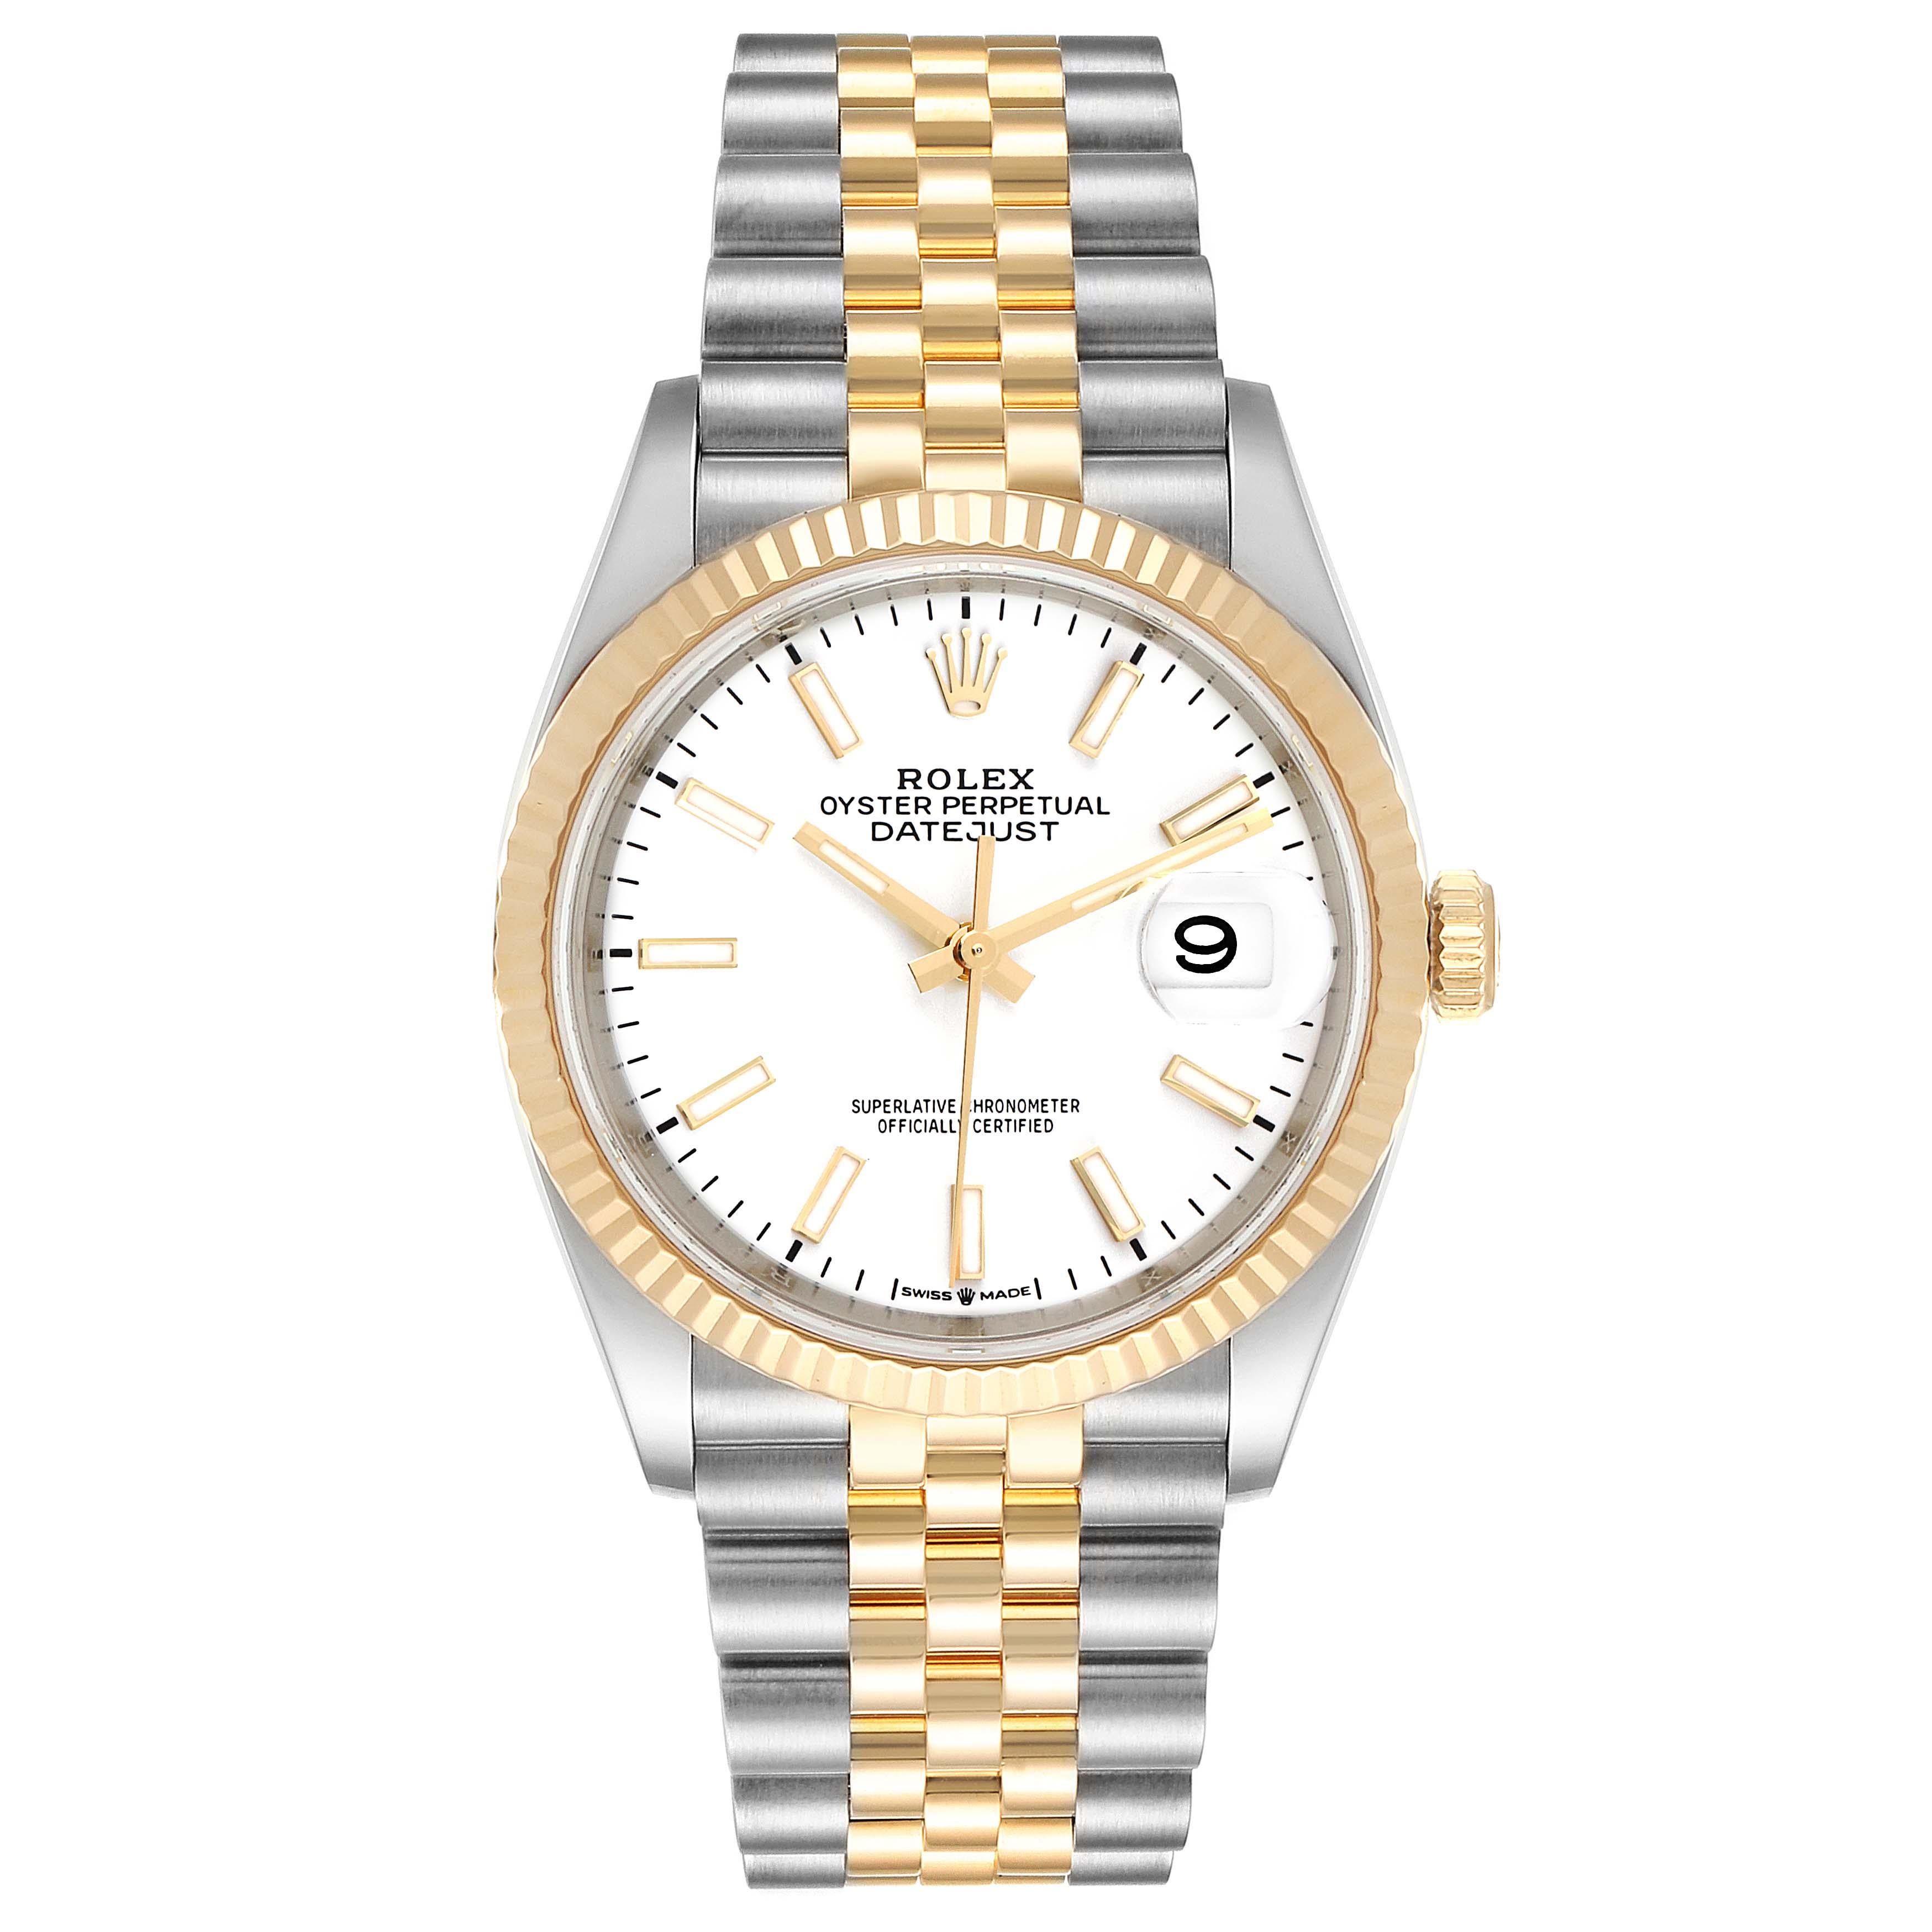 Rolex Datejust Steel Yellow Gold Jubilee Bracelet Men's Watch 126233. Officially certified chronometer self-winding movement. Stainless steel and 18K yellow gold case 36.0 mm in diameter. Rolex logo on a crown. 18K yellow gold fluted bezel. Scratch